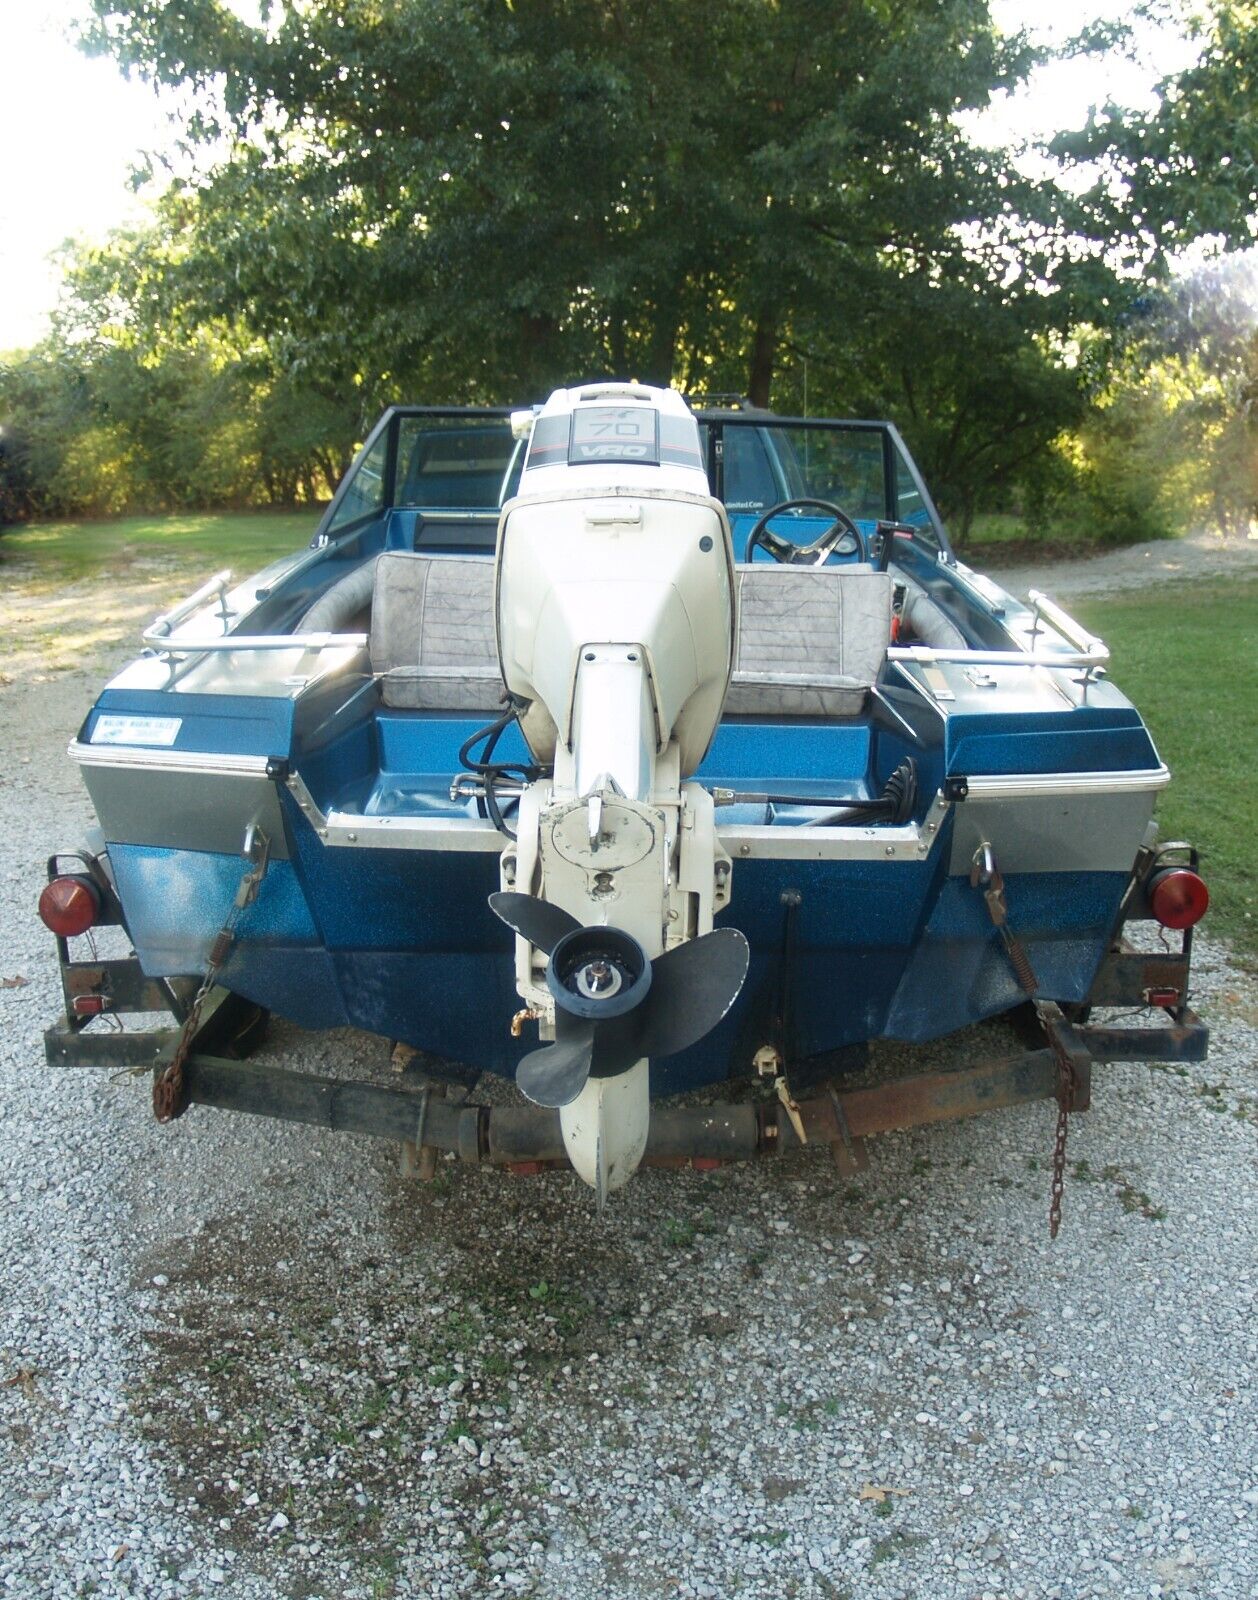 Stryker Runabout Ski Boat Hp Johnson Outboard Motor Ft